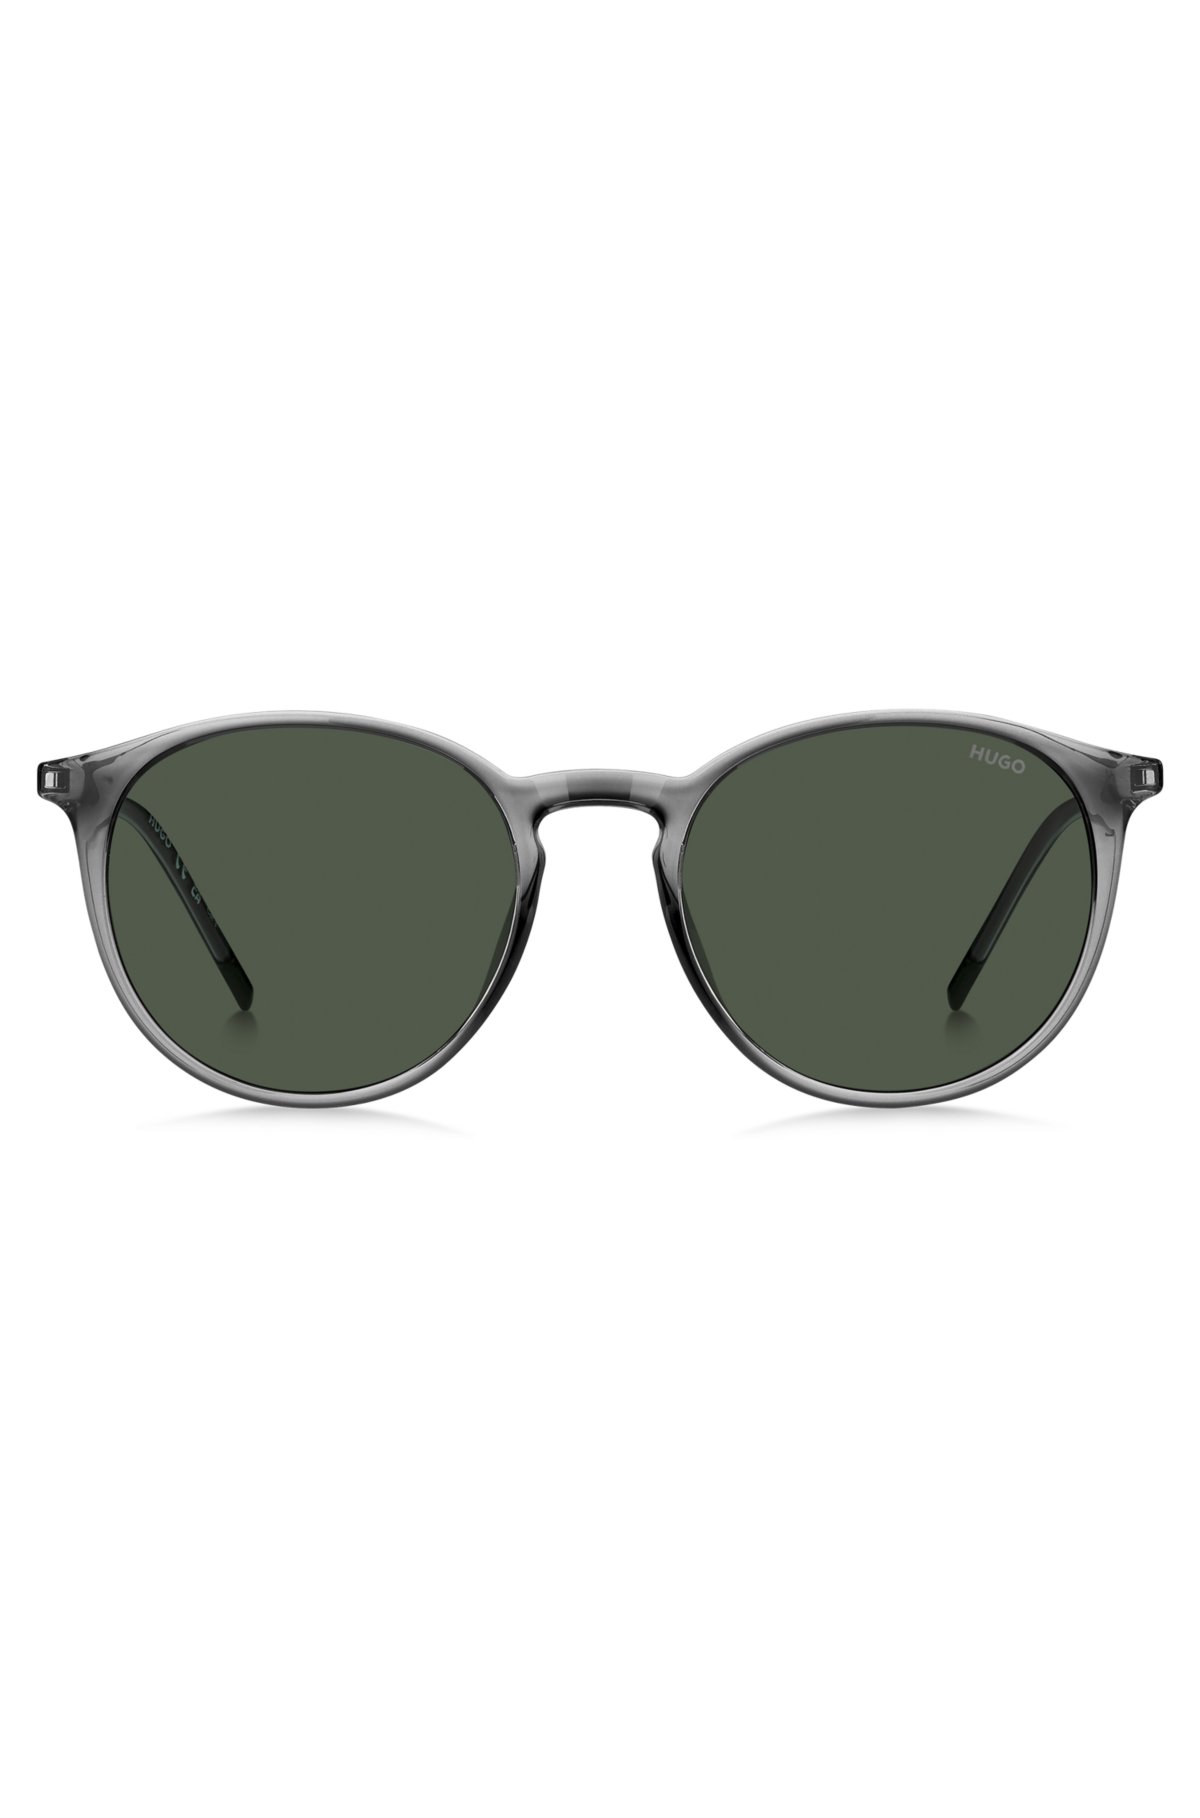 Grey sunglasses with rounded metal temples, Grey